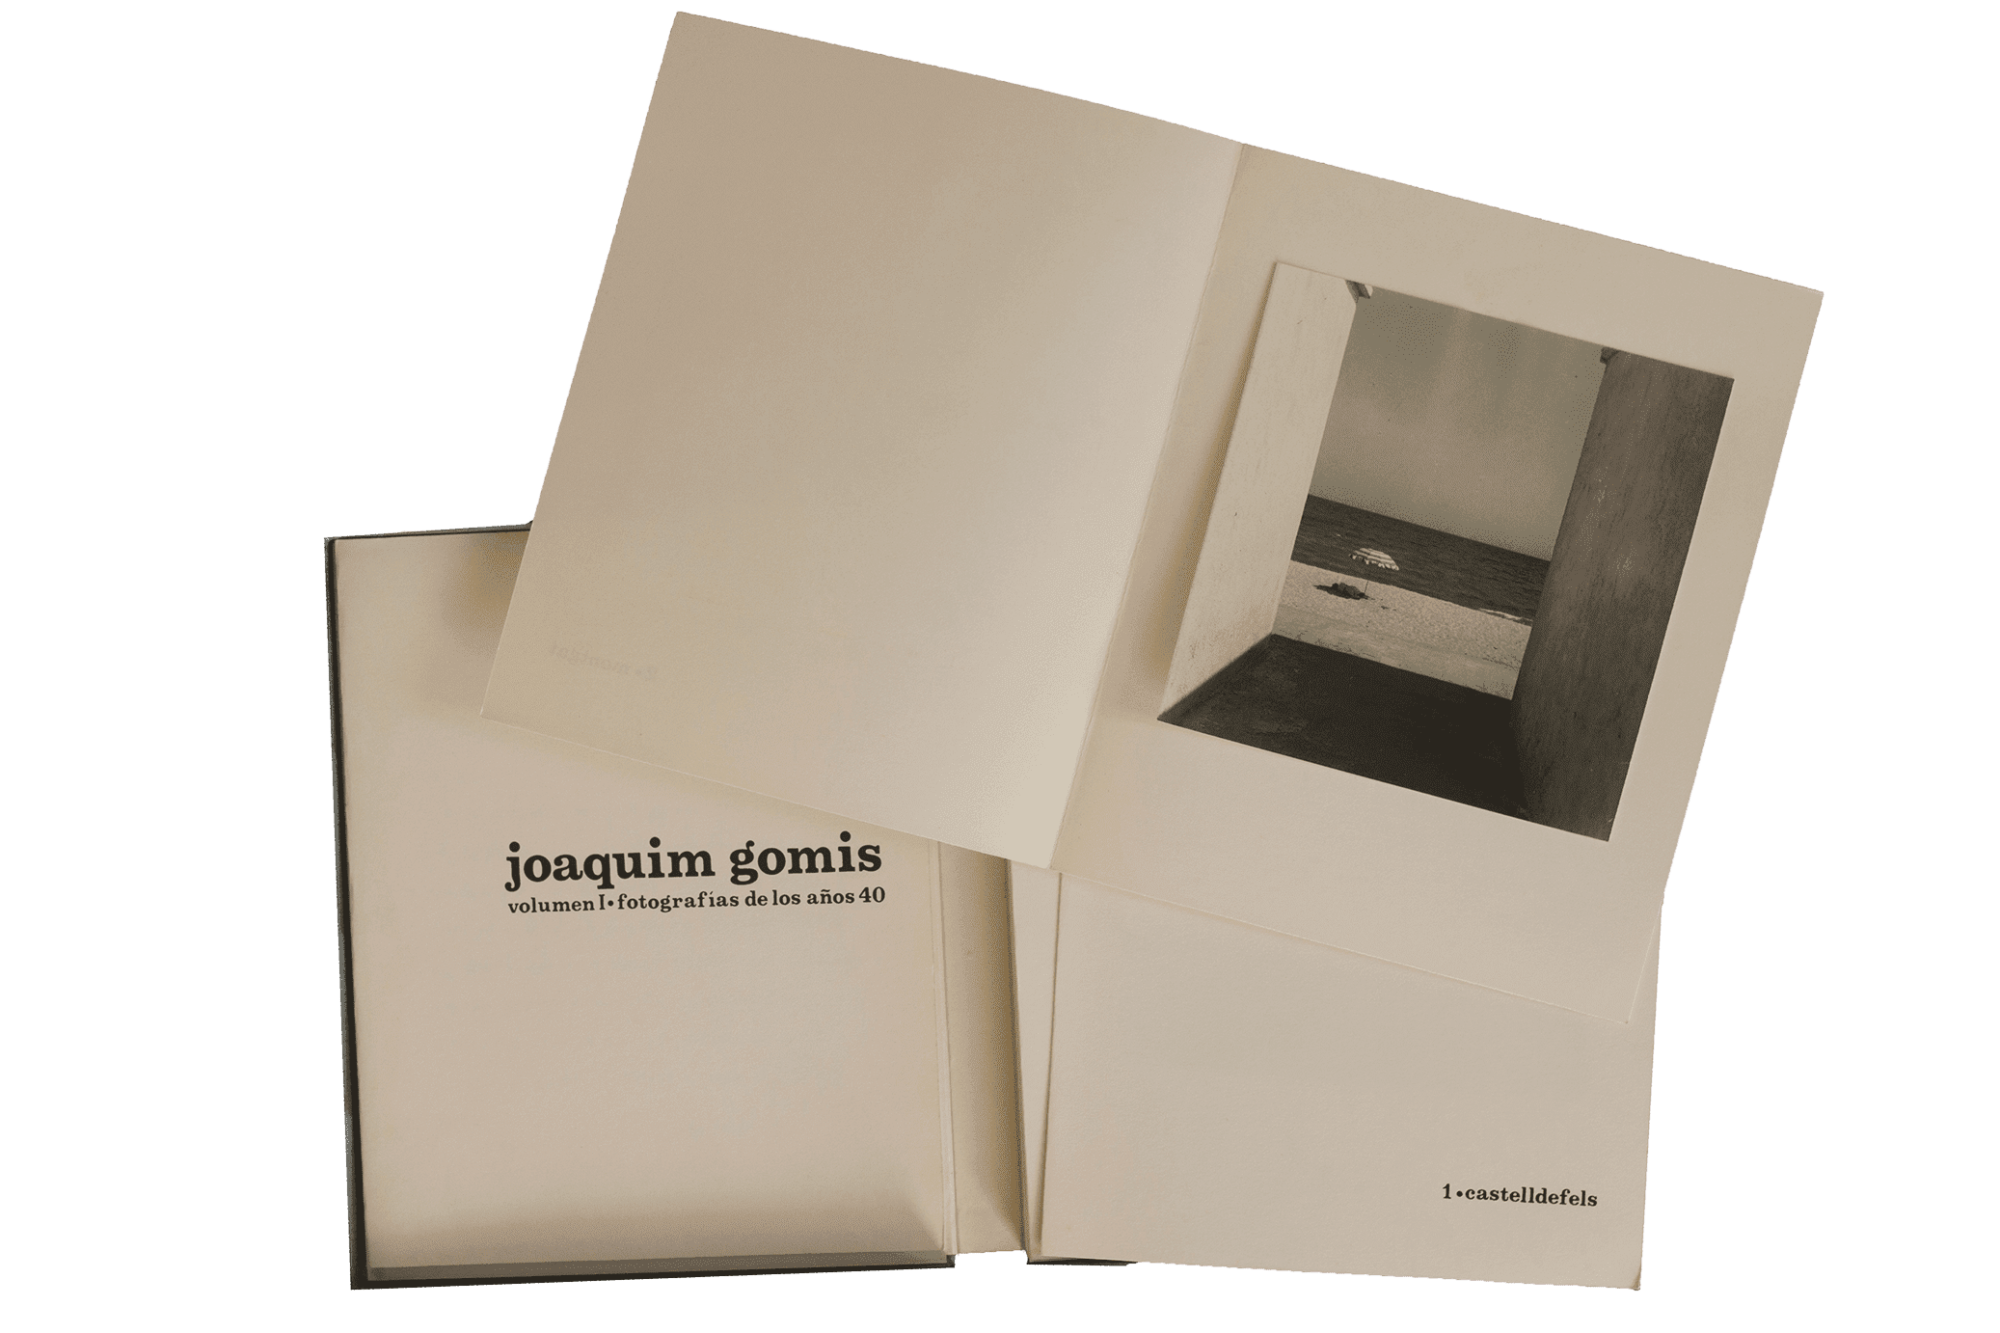 Joaquim Gomis, Photographs from the 40s, 1976